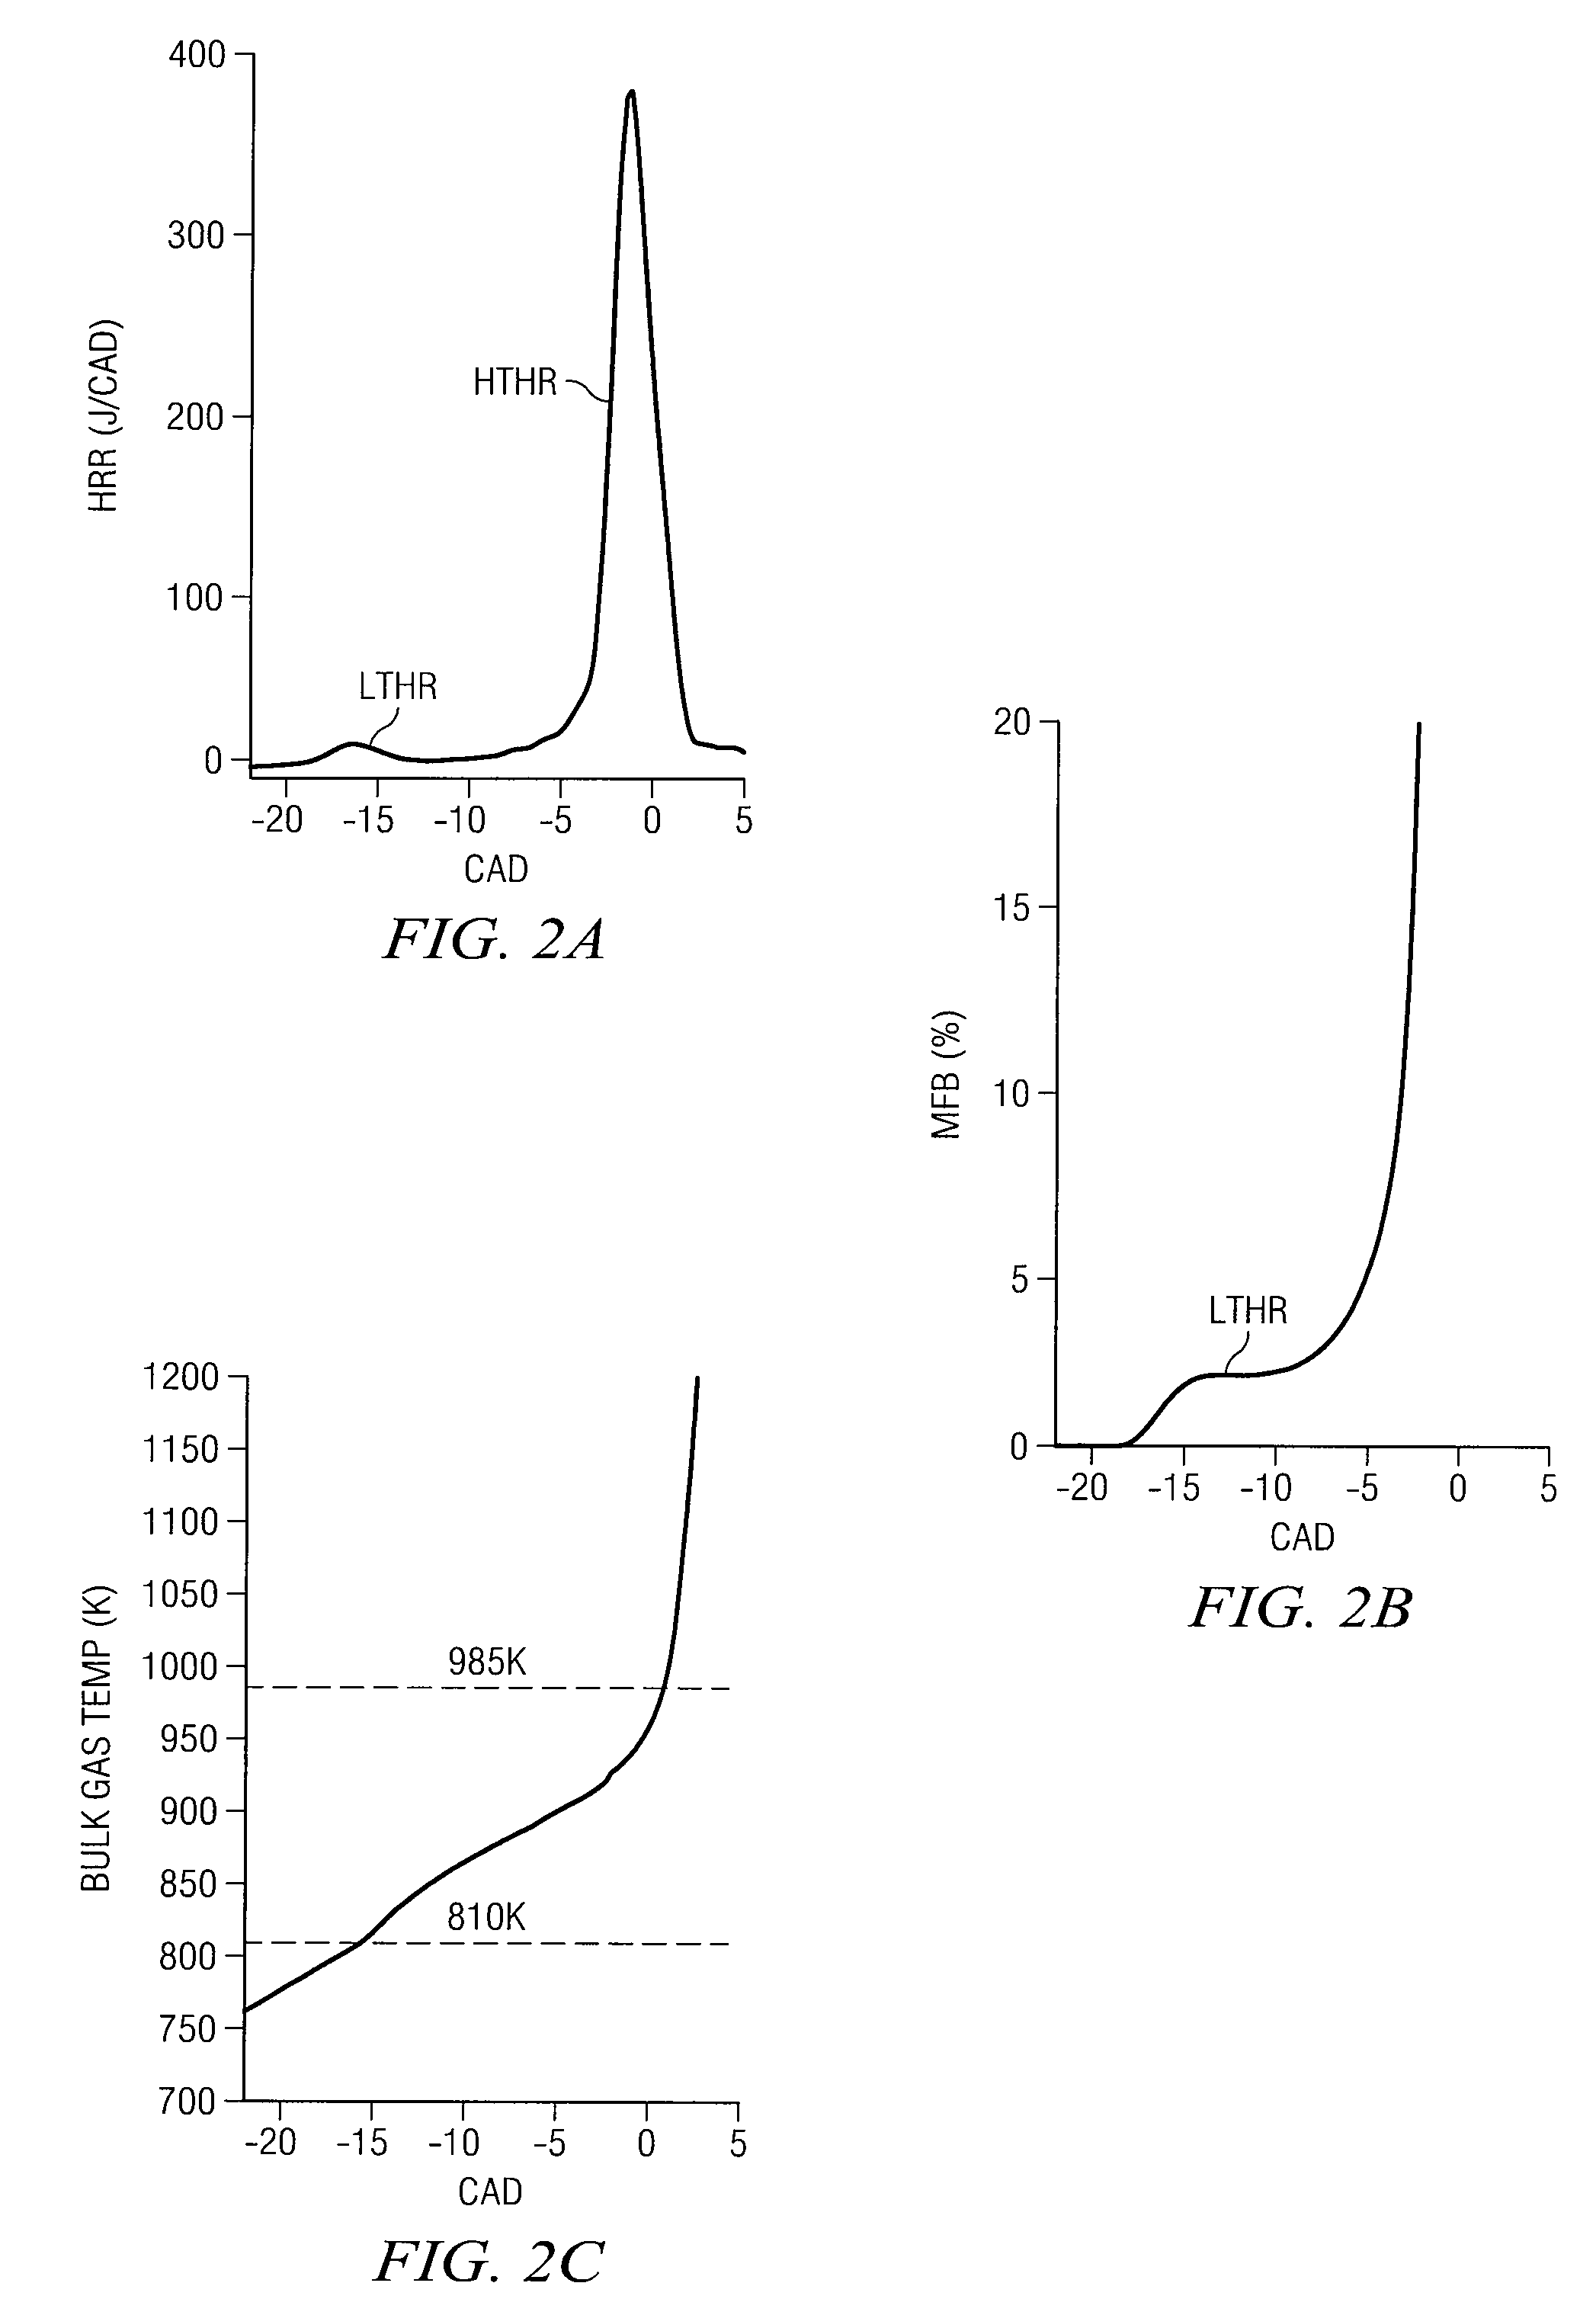 Hcci combustion timing control with decoupled control of in-cylinder air/egr mass and oxygen concentration